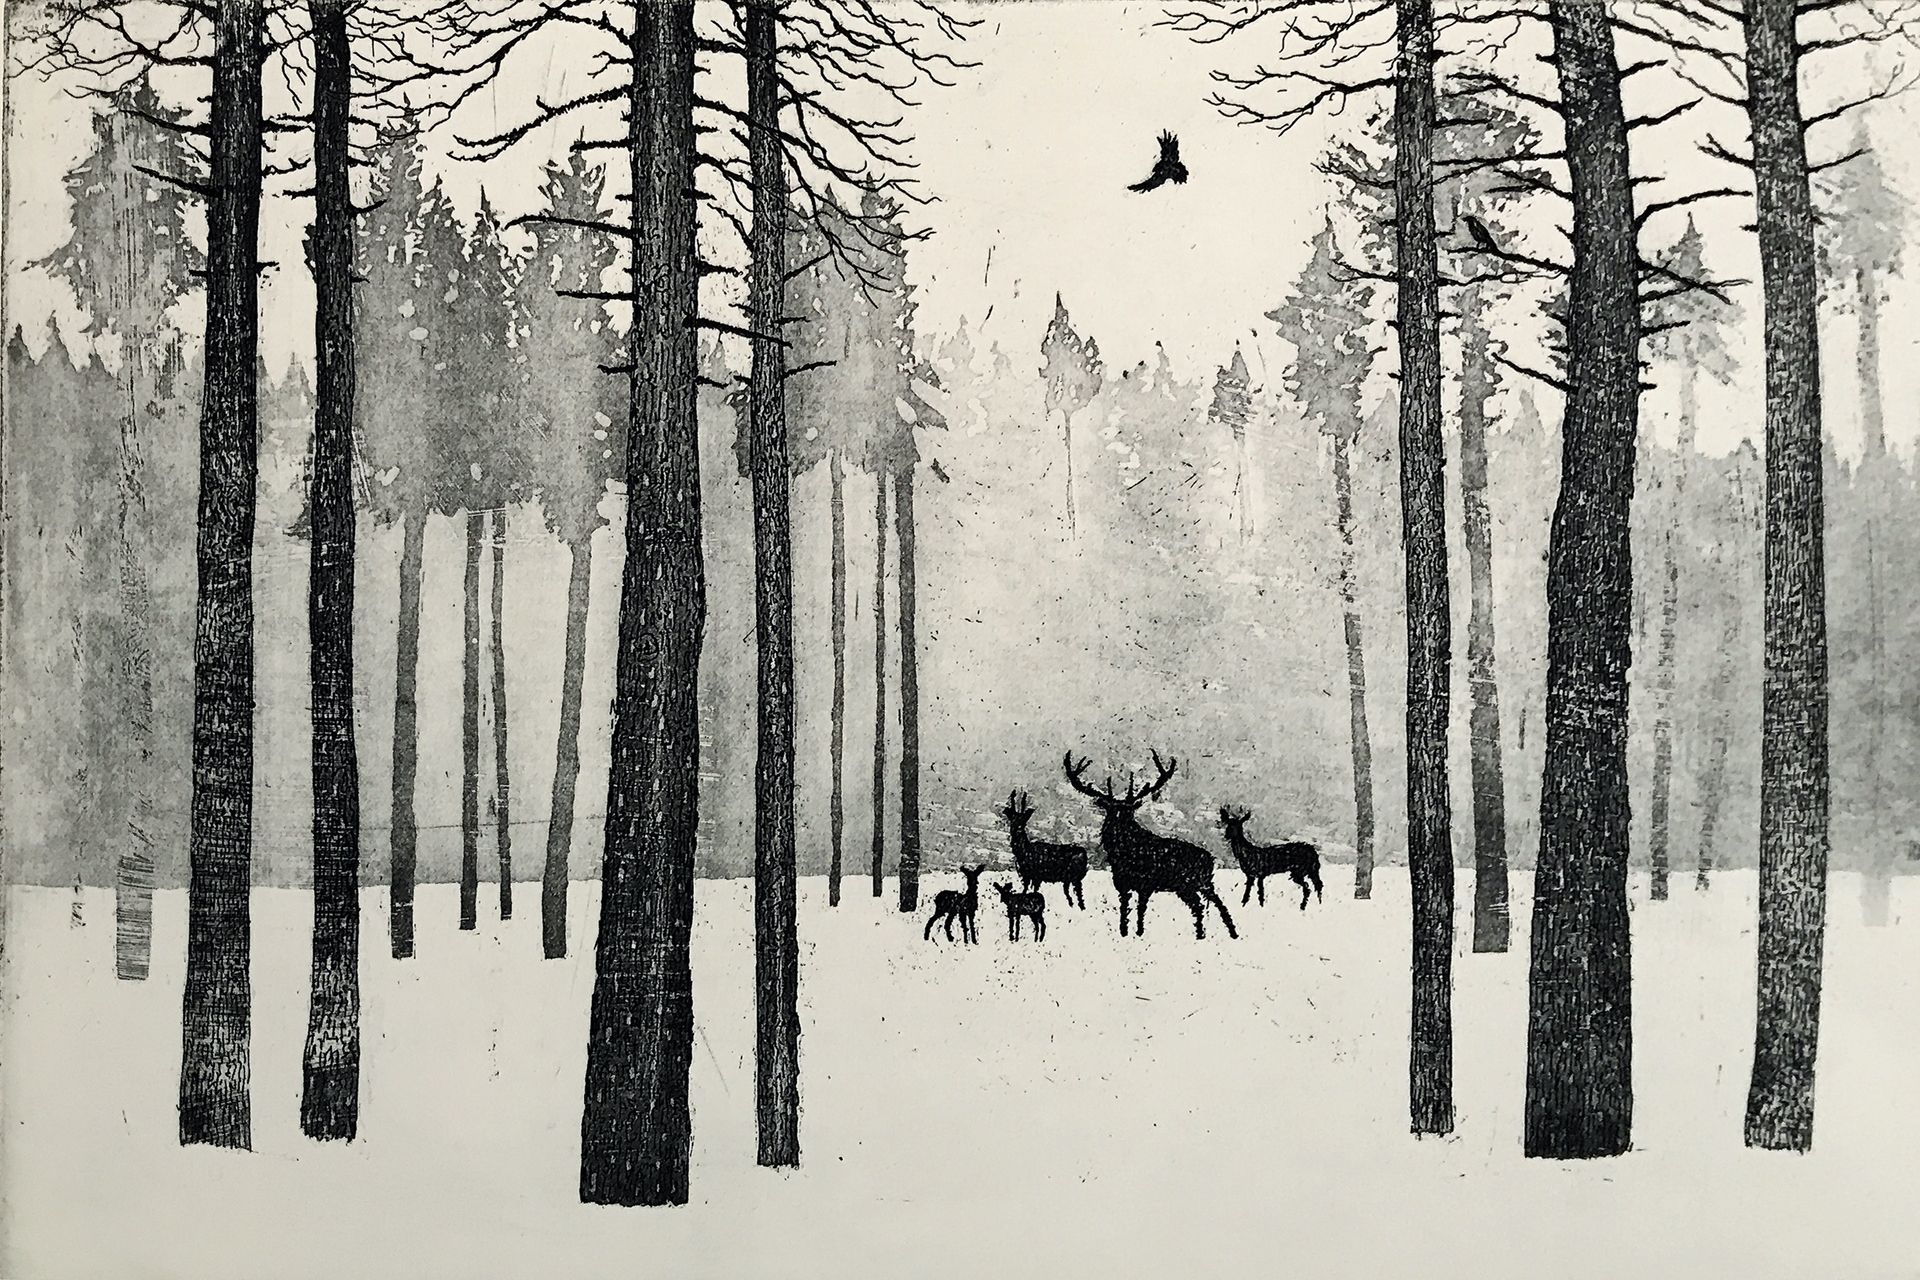 Deer in Winter by Tim Southall